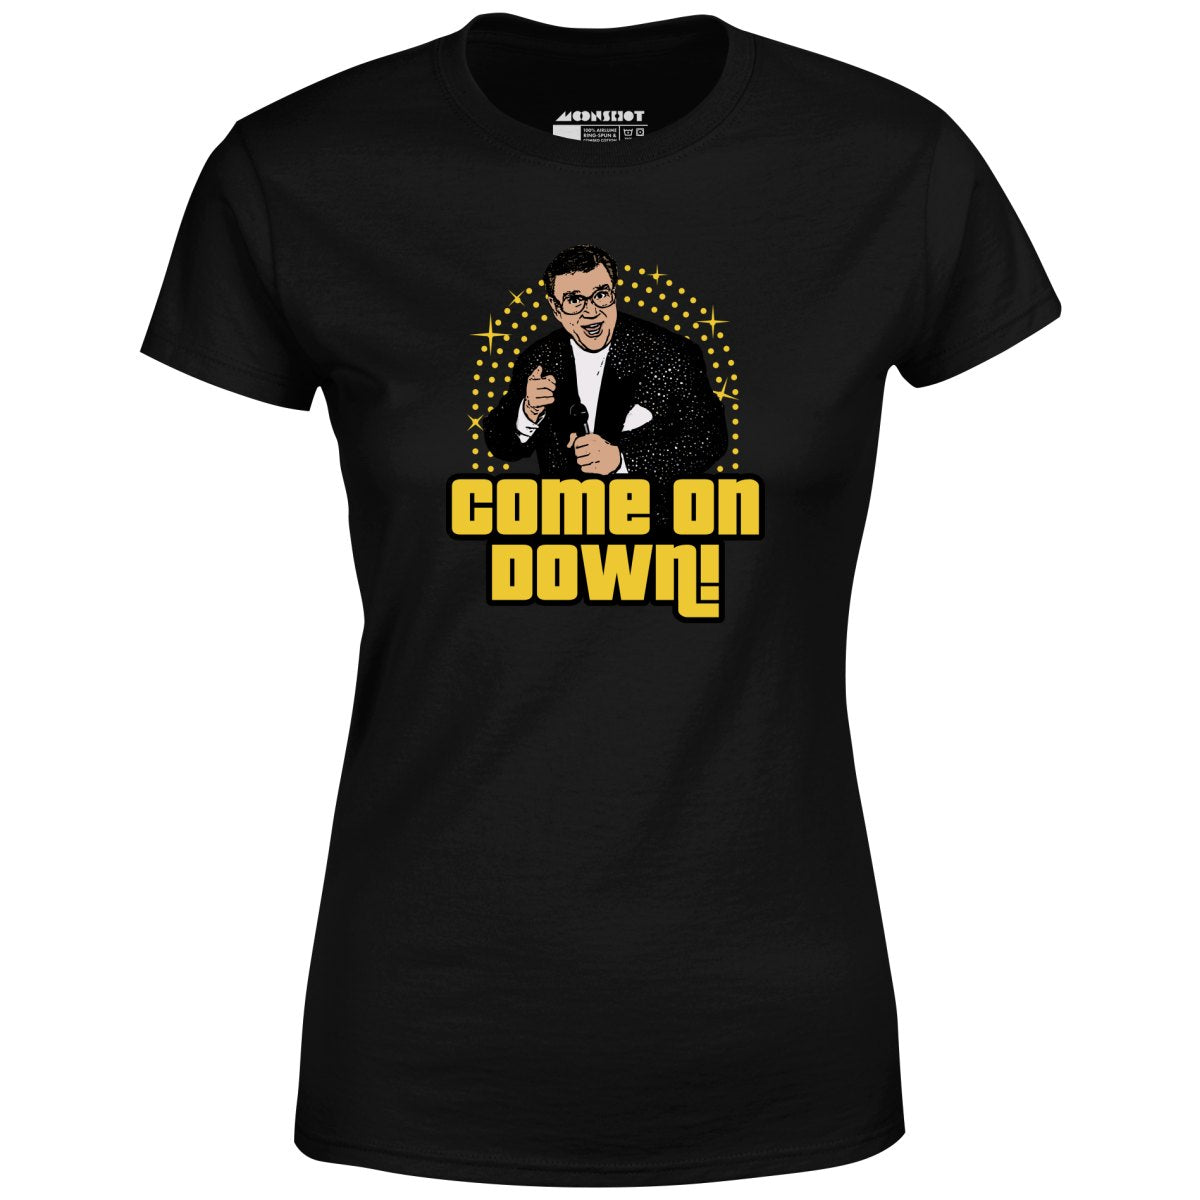 Come On Down - Women's T-Shirt